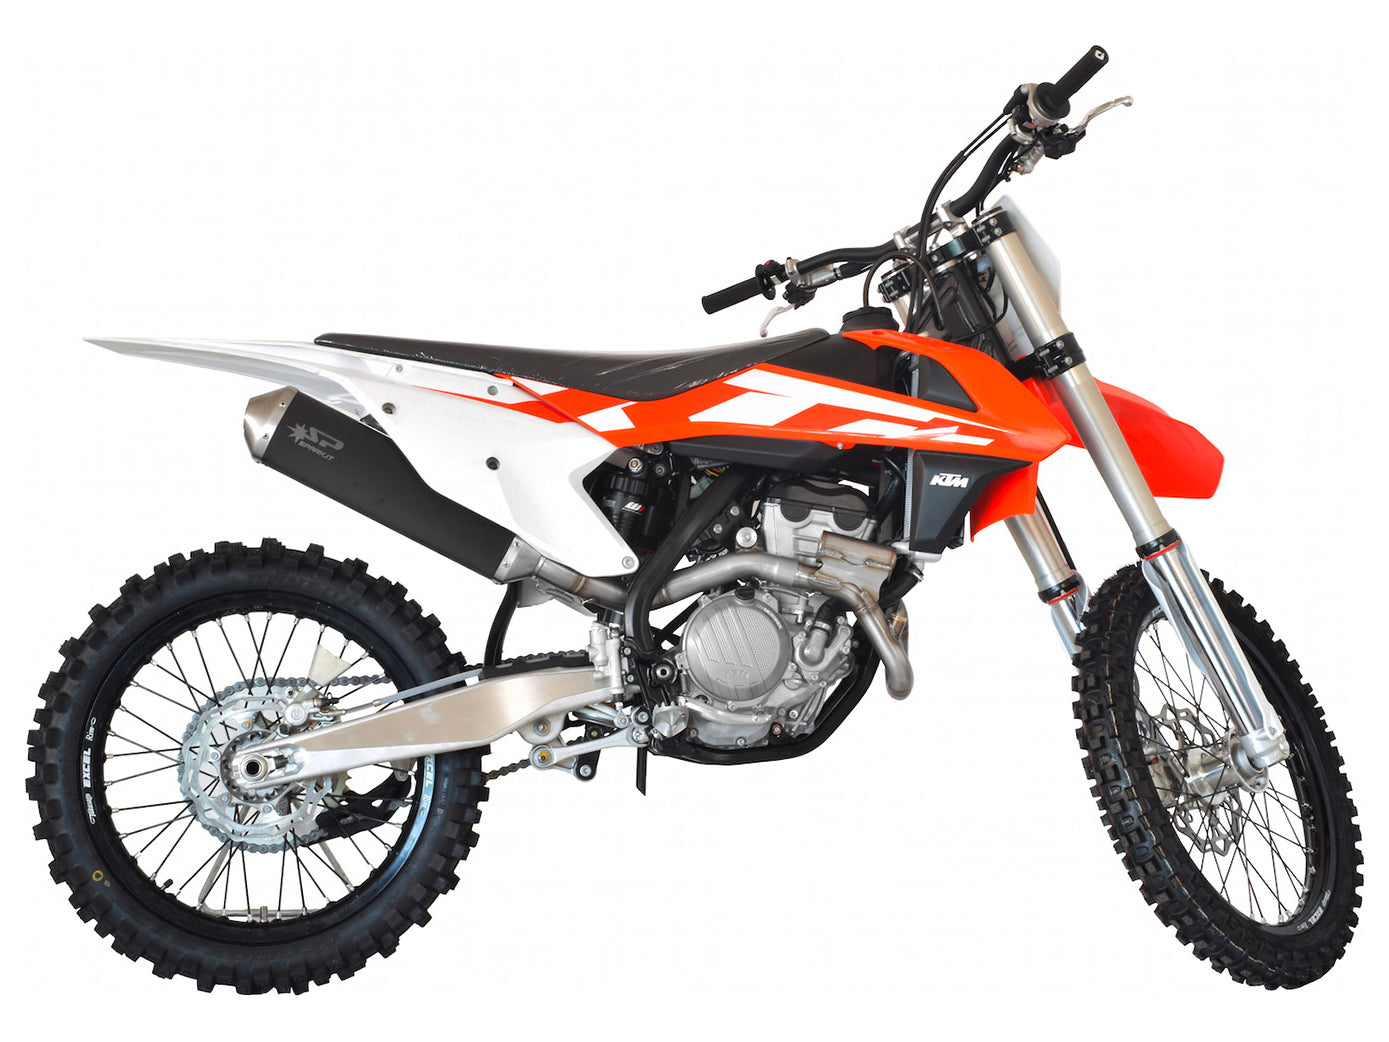 SPARK GKT8001 KTM SX-F 250 (11/12) Full Exhaust System "Off Road" (racing)